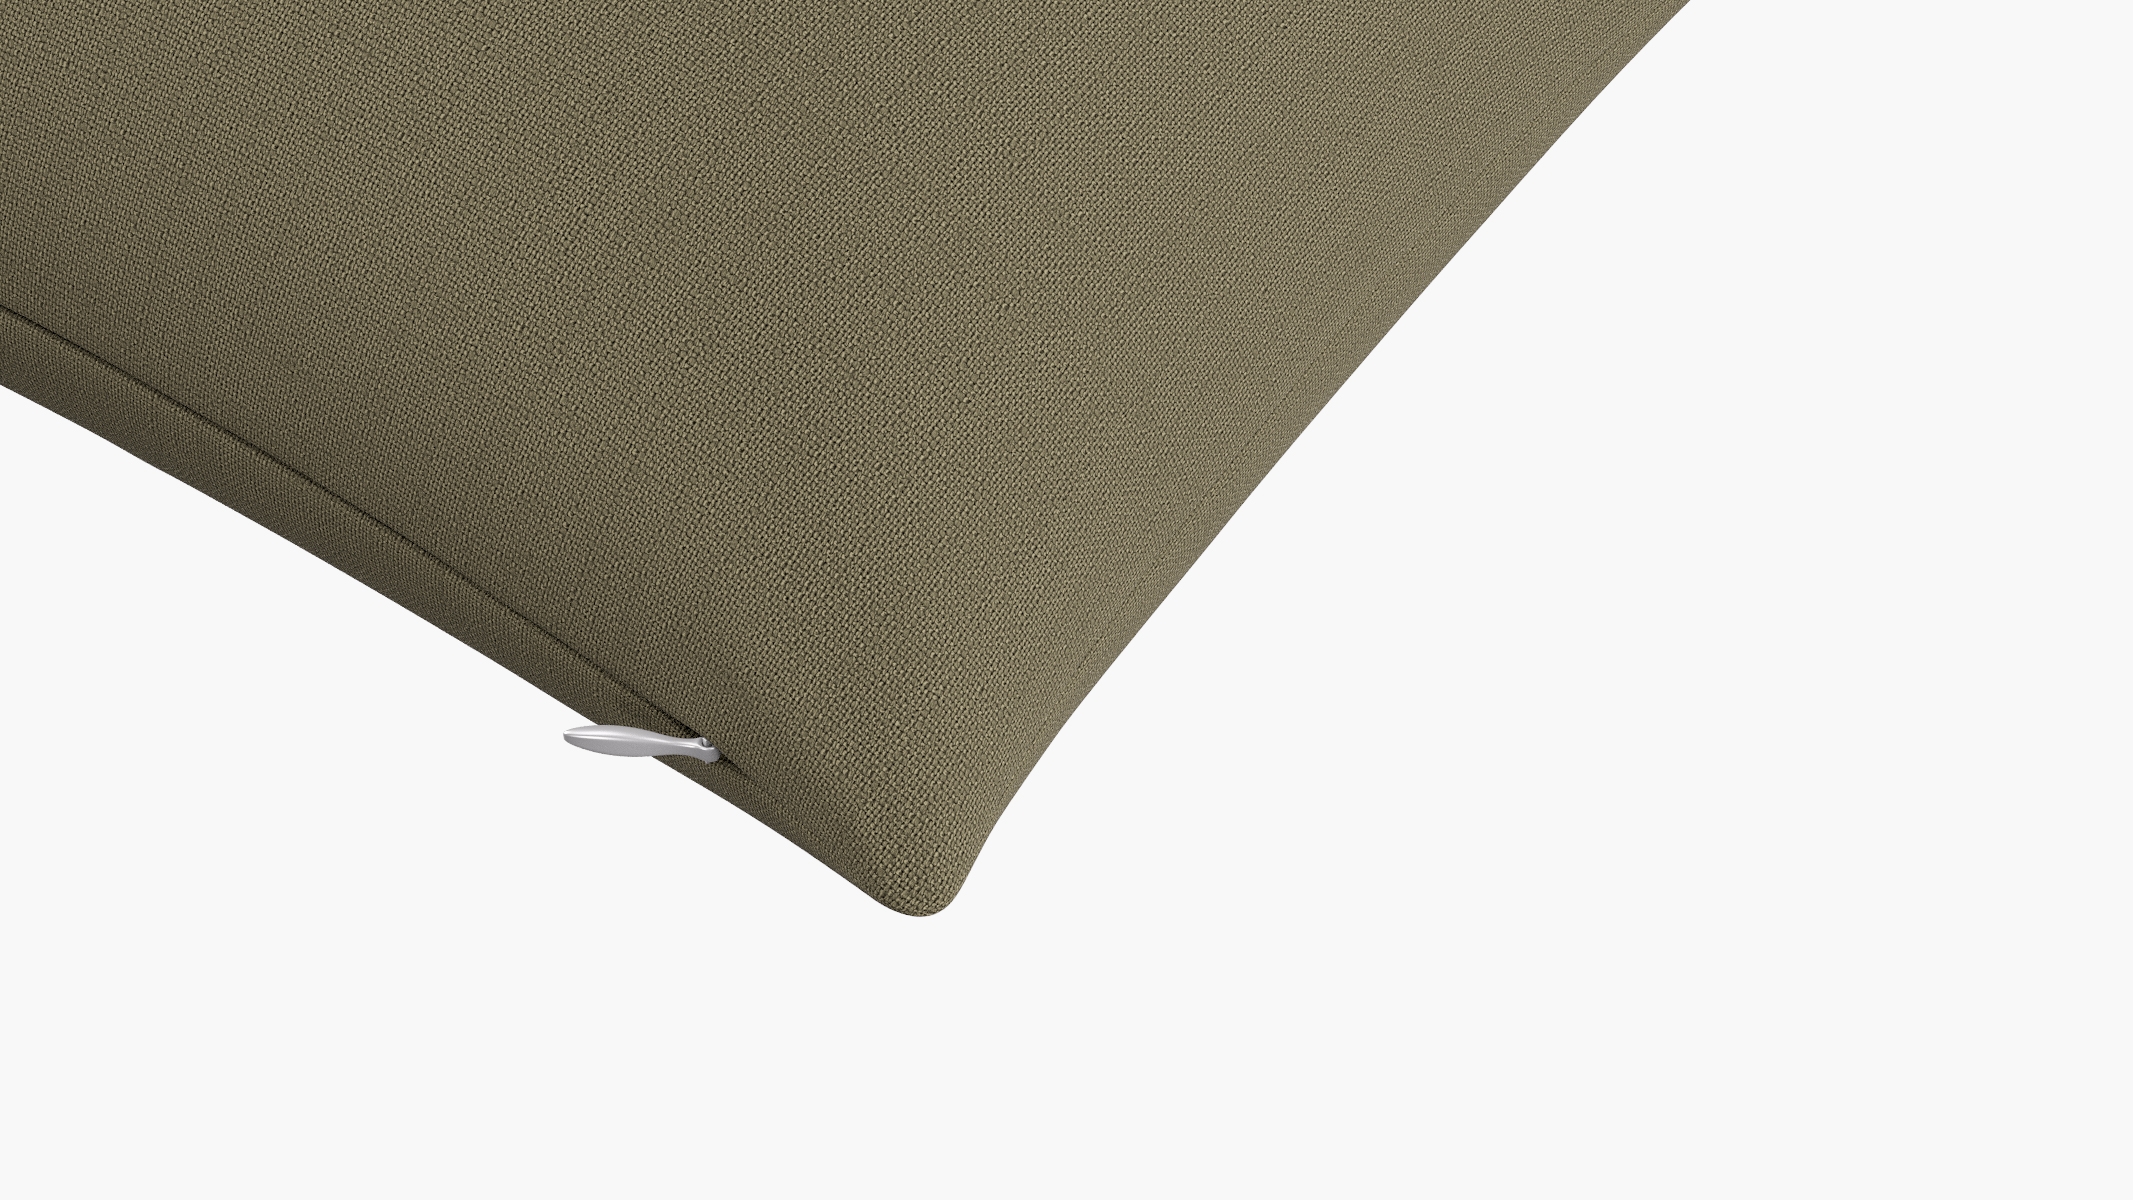 Throw Pillow 14" x 20", Olive Everyday Linen, 14" x 20" - Image 1